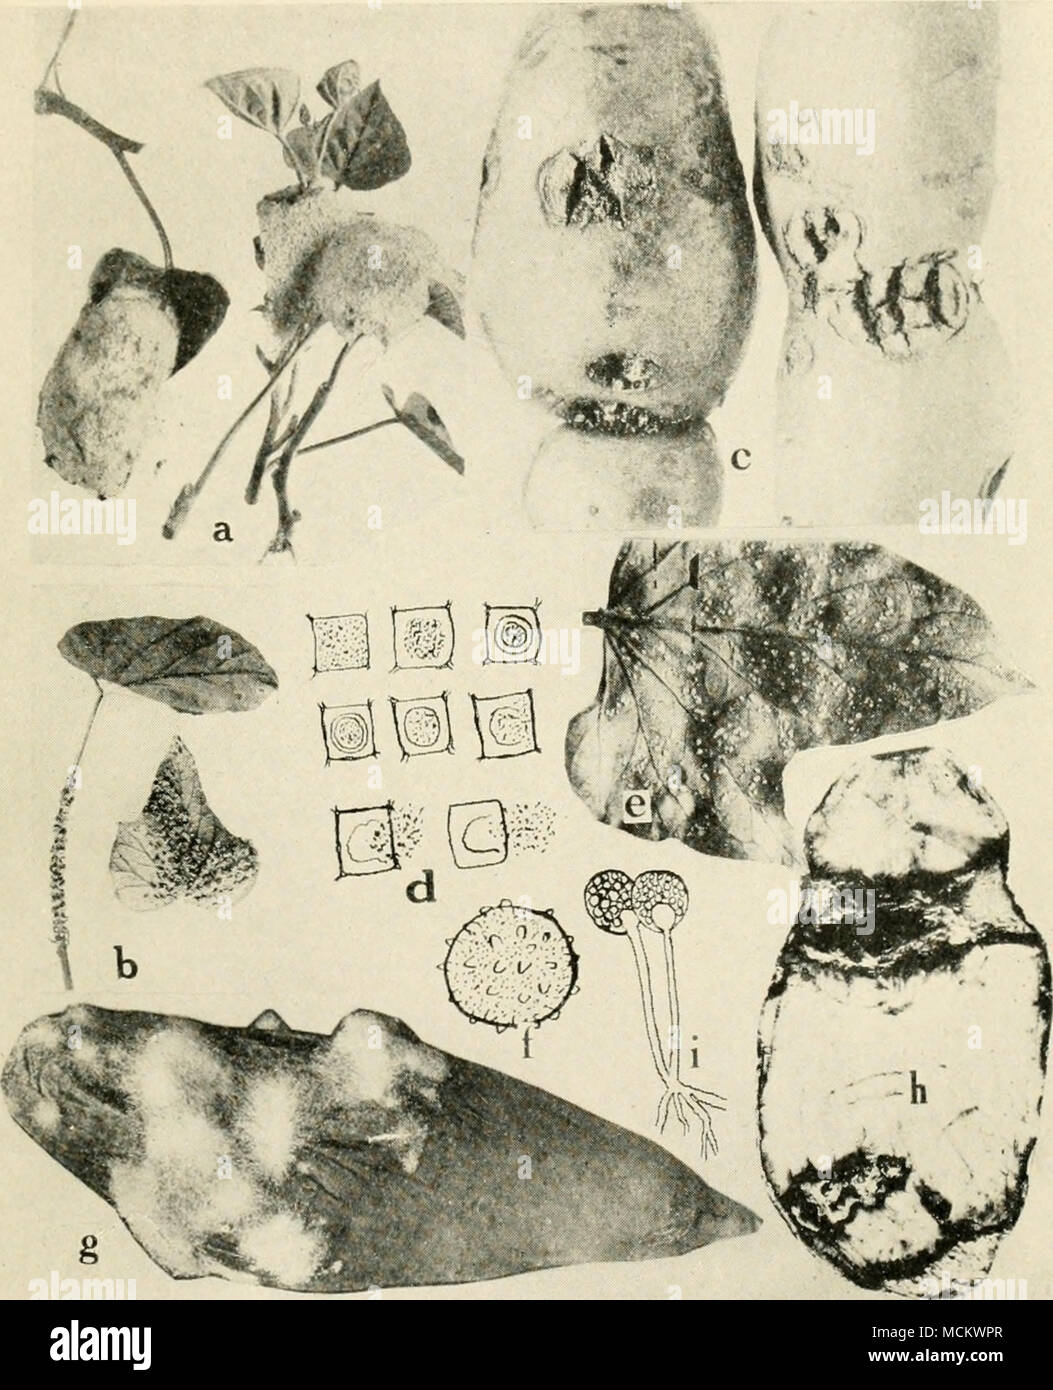 . Fig. 25. Sweet Potato Diseases. a. Slime mold {Fiiligo violacea), b. slime mold (Physarum plumbeitm), c. pox or pit, d. formation of a cyst and liberation of spores of Cystospora batata (after Elliot), e. white rust, /. oospore of the white rust fungus, g. soft rot, /;. ring rot, ;'. fruiting stalks of Rhizopus nigricans. Stock Photo